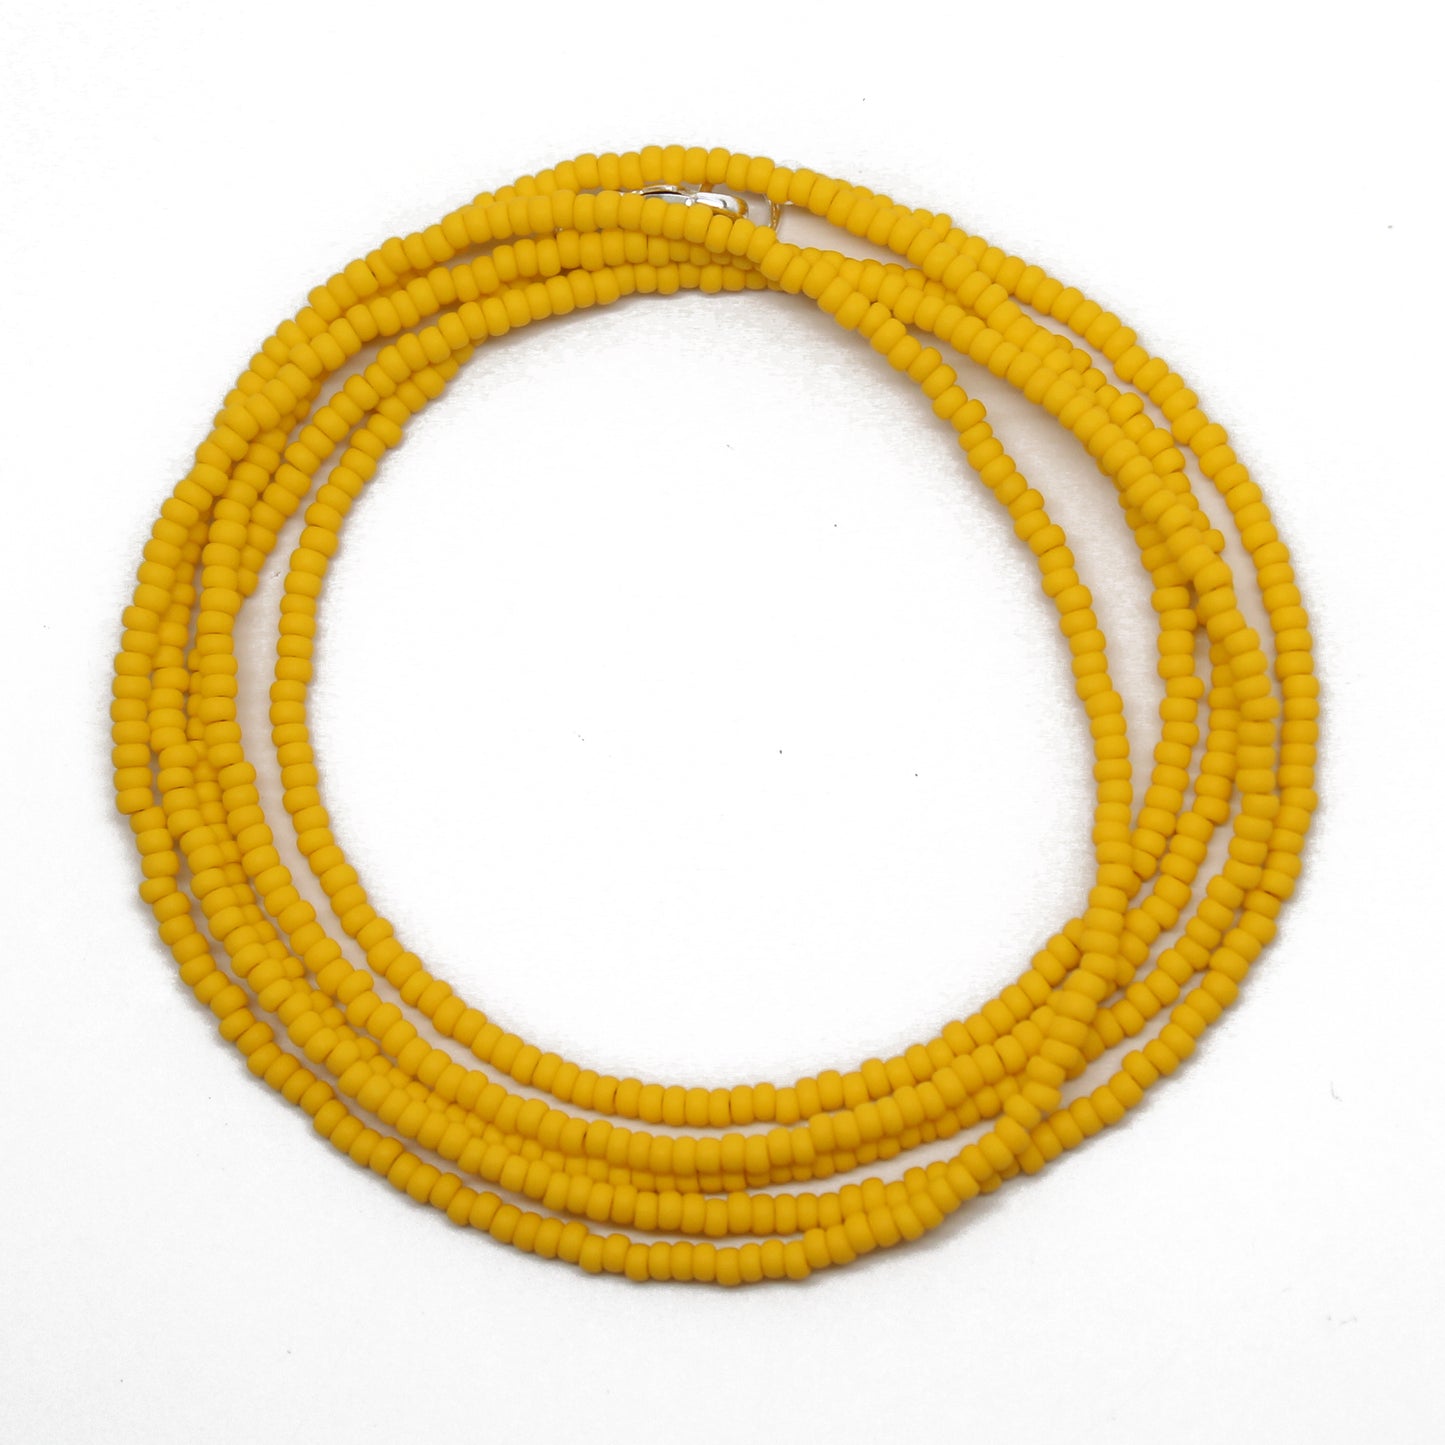 Canary Yellow Seed Bead Necklace, Thin 1.5mm Single Strand Beaded Necklace